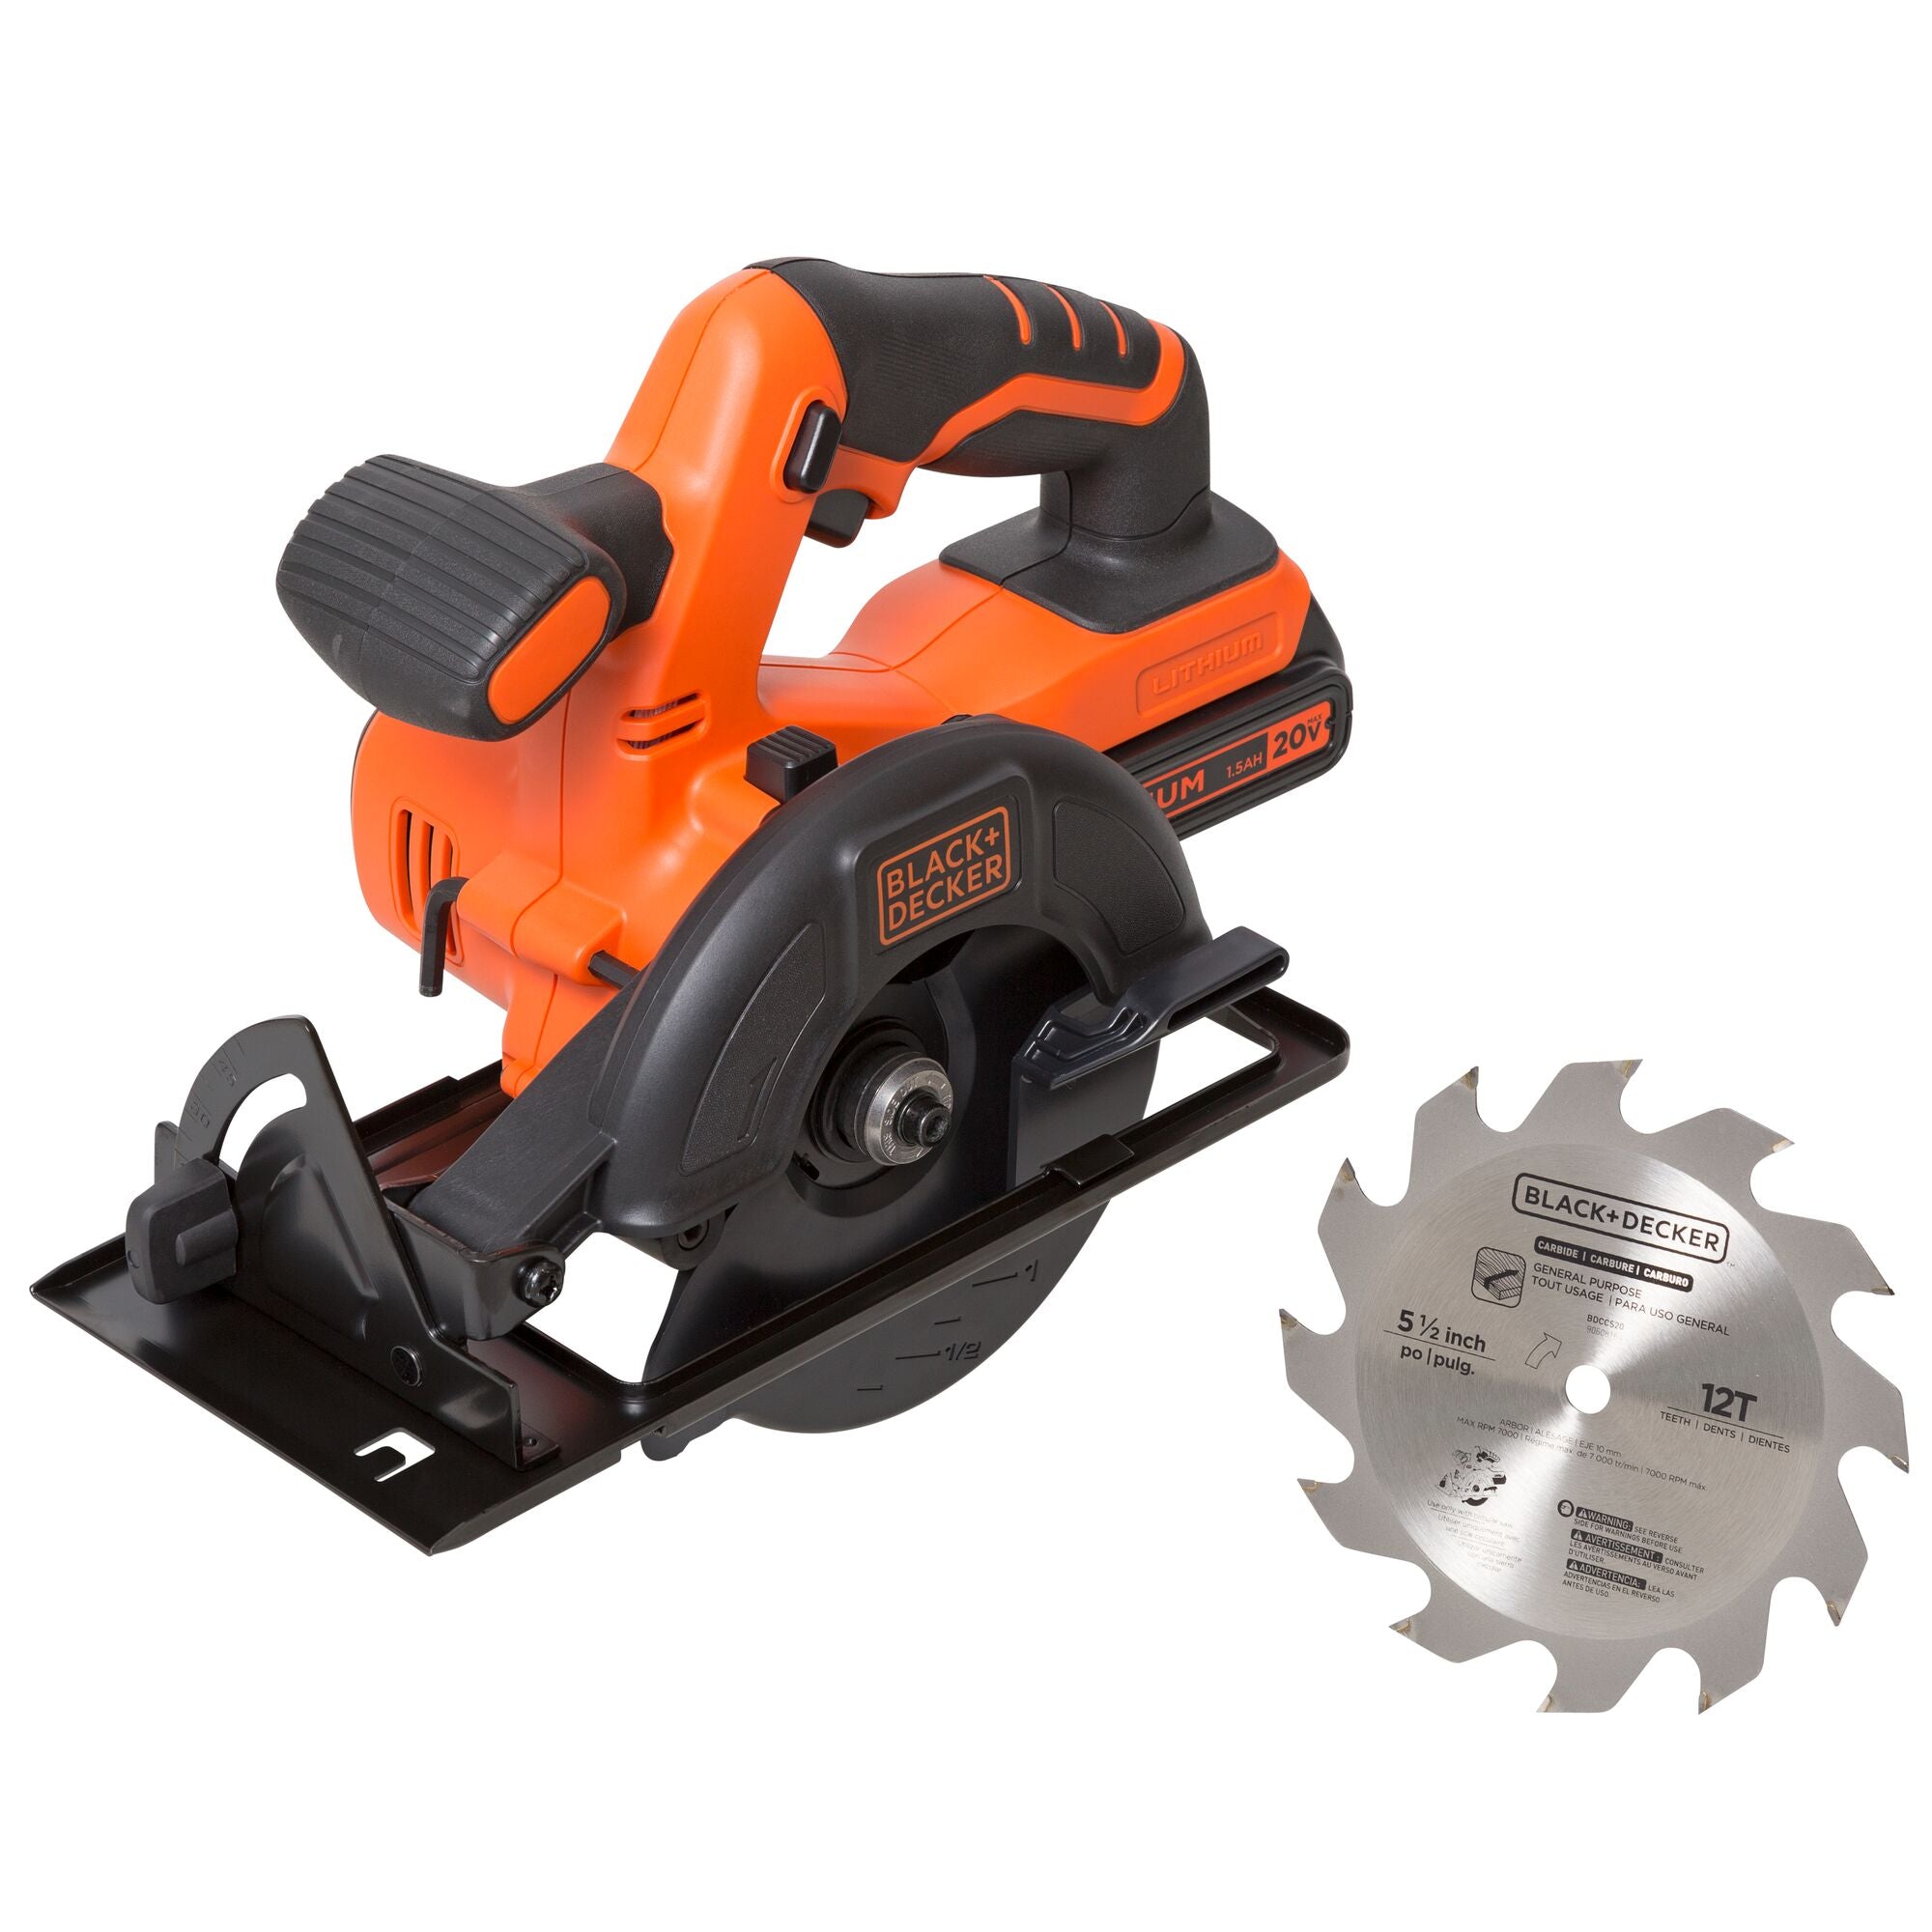 Profile of Lithium Ion Drill Driver plus Circular Saw Combo Kit.